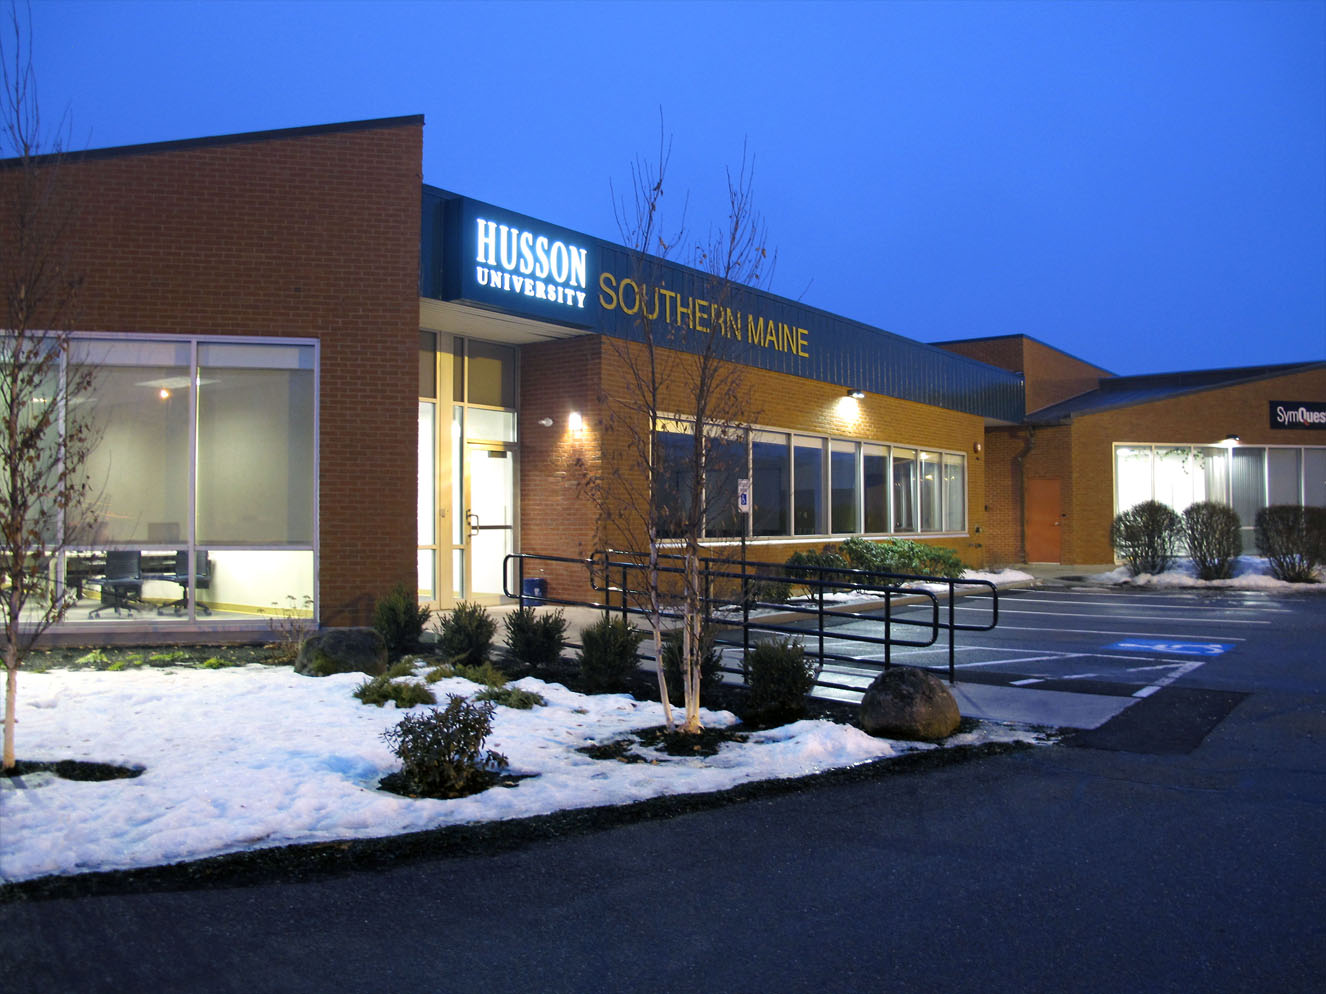 Exterior of Husson University Southern Maine